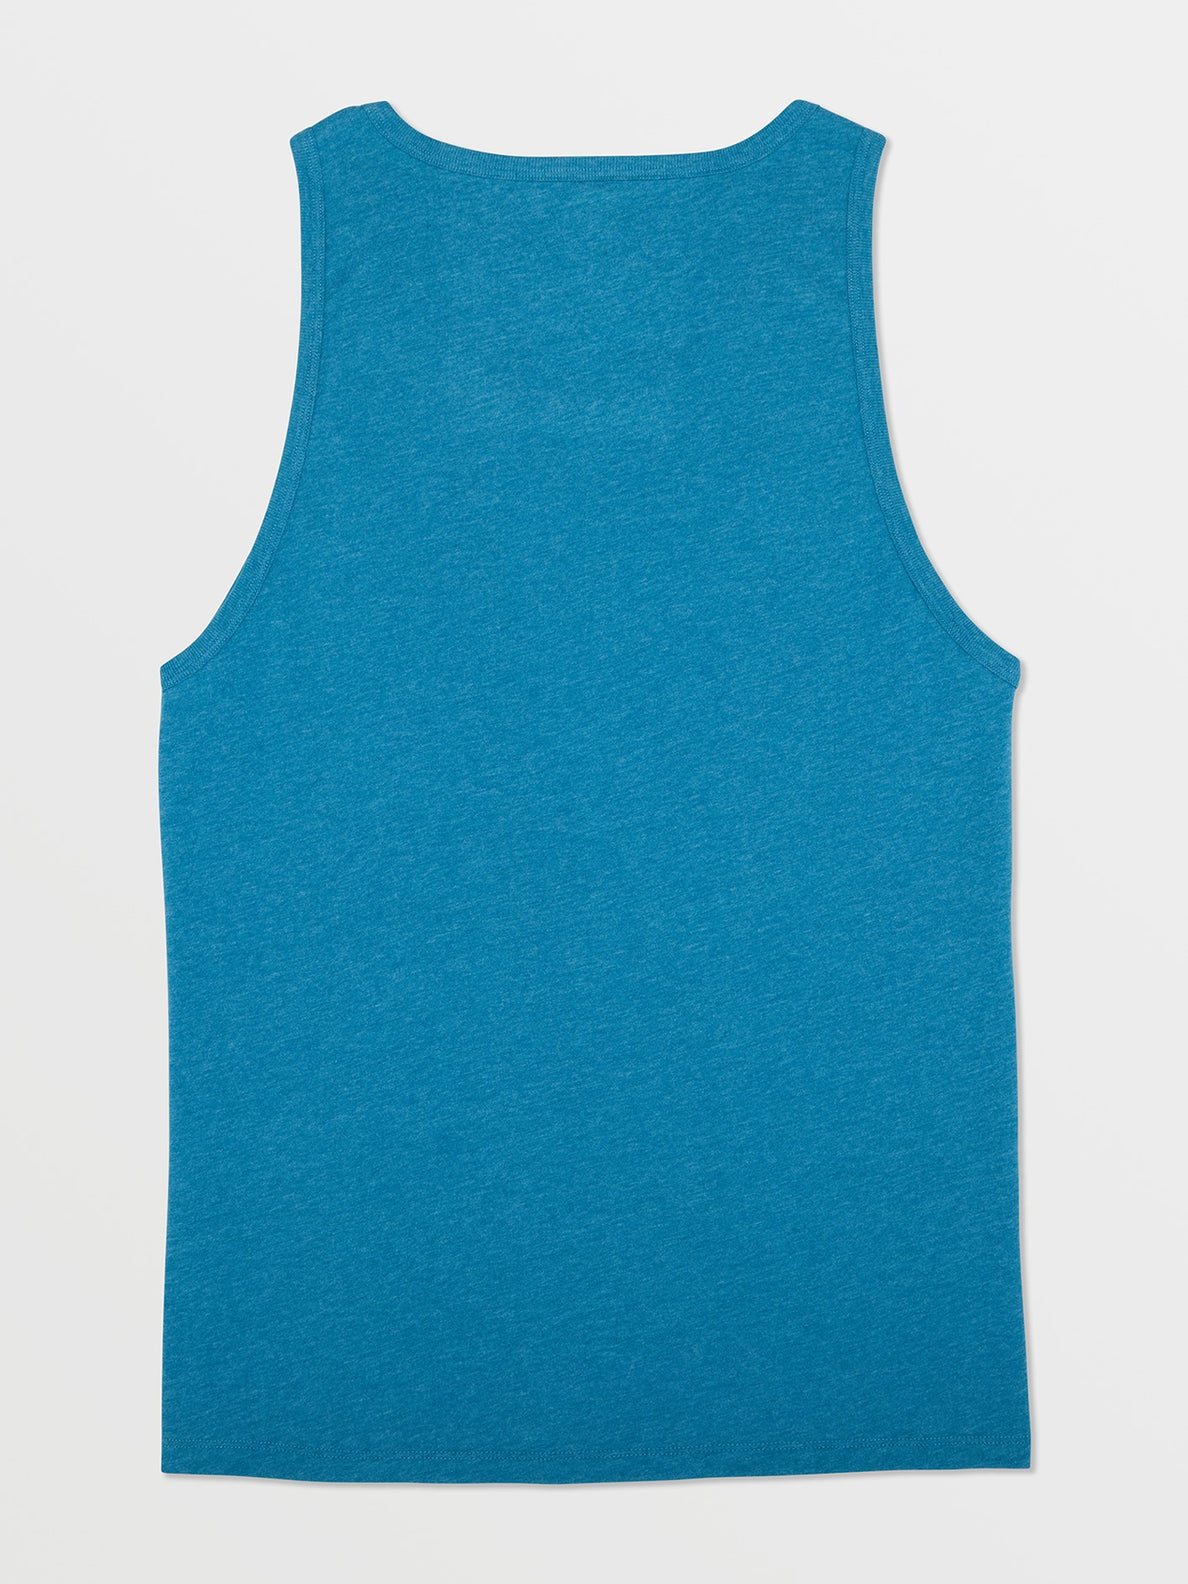 Solid Heather Tank - Stormy Blue